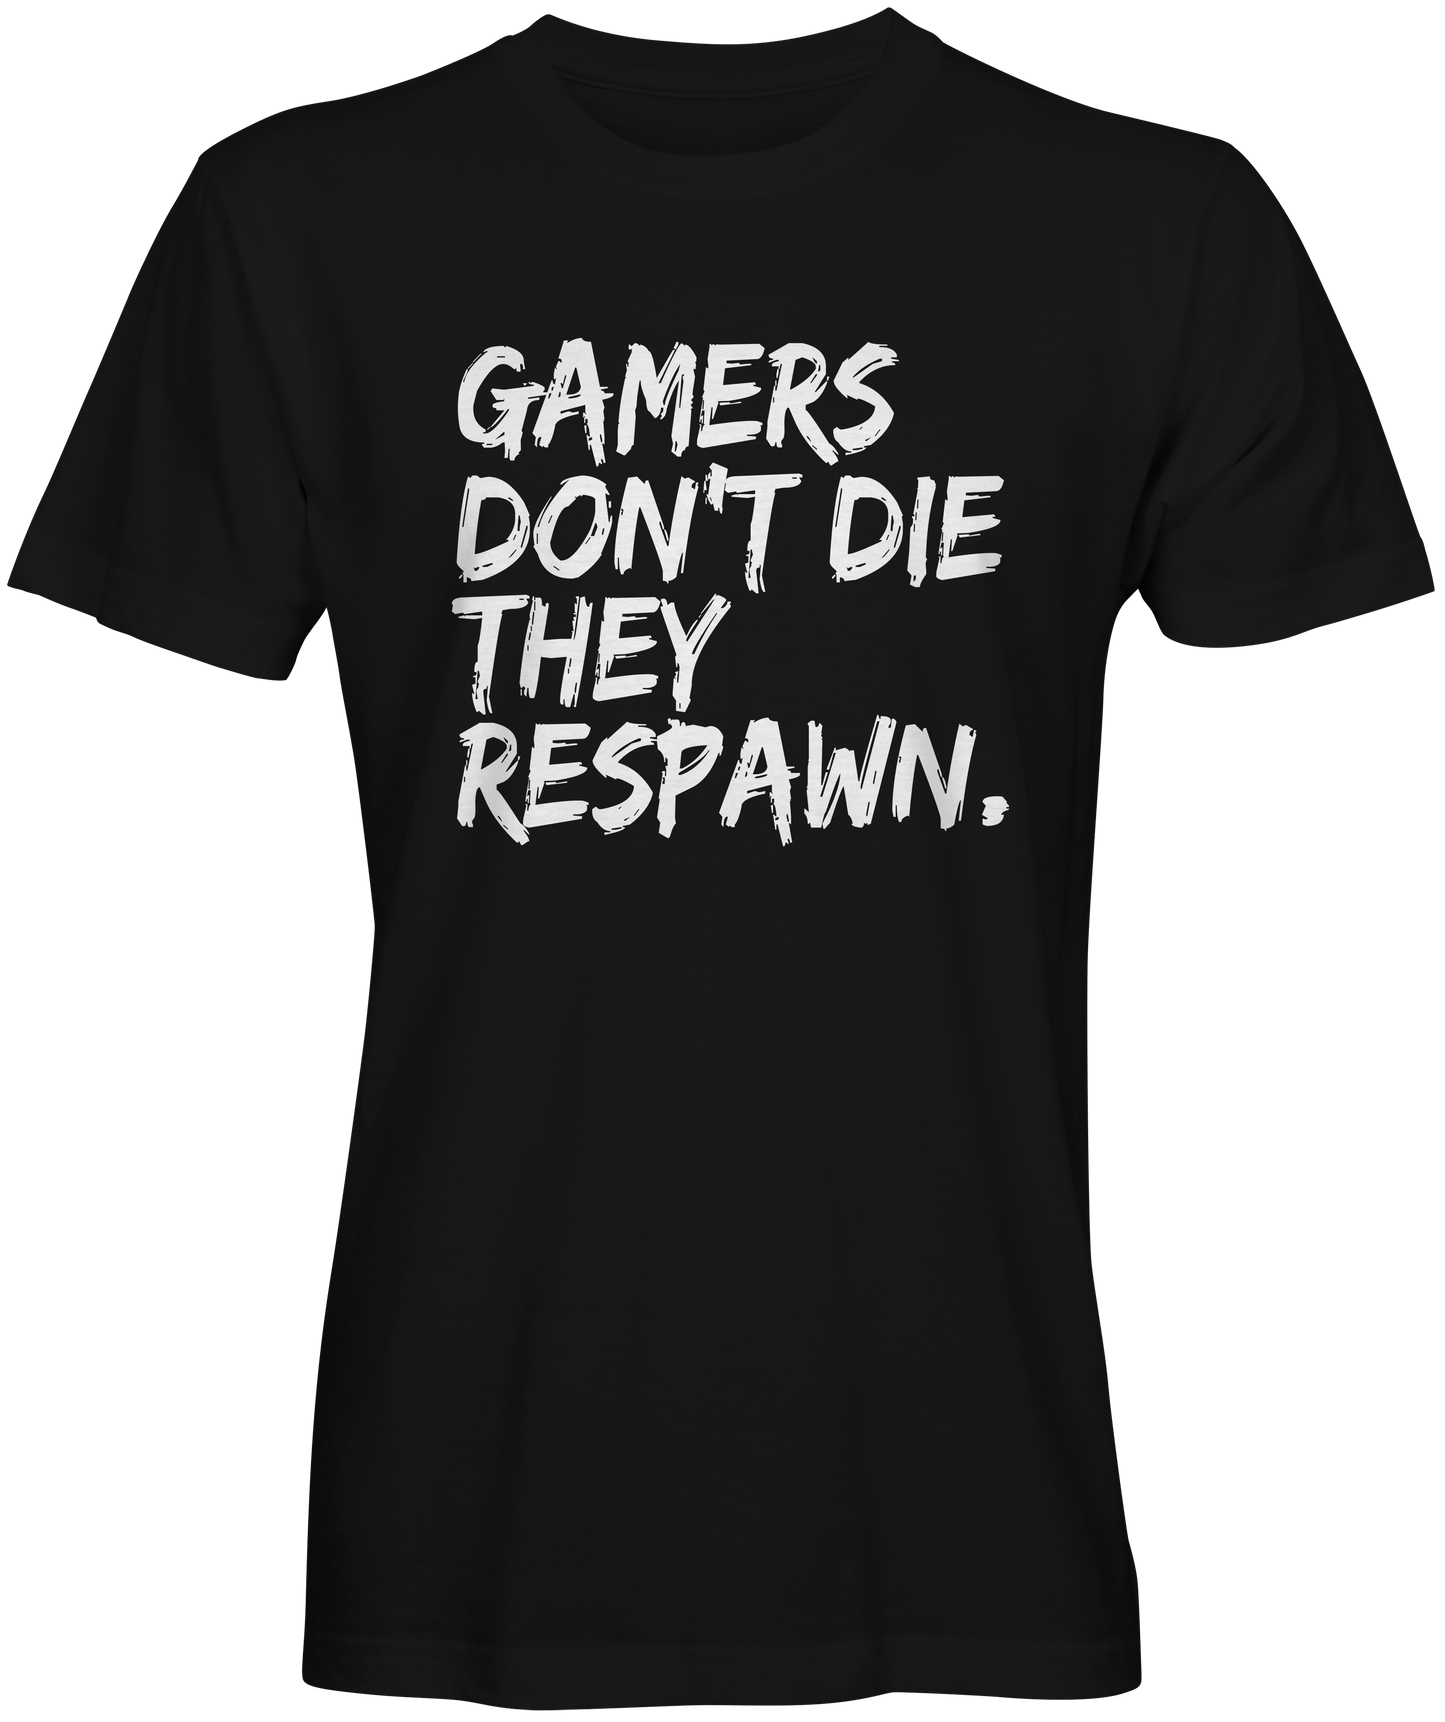 Gamers Respawn Unisex T-Shirts for Sale